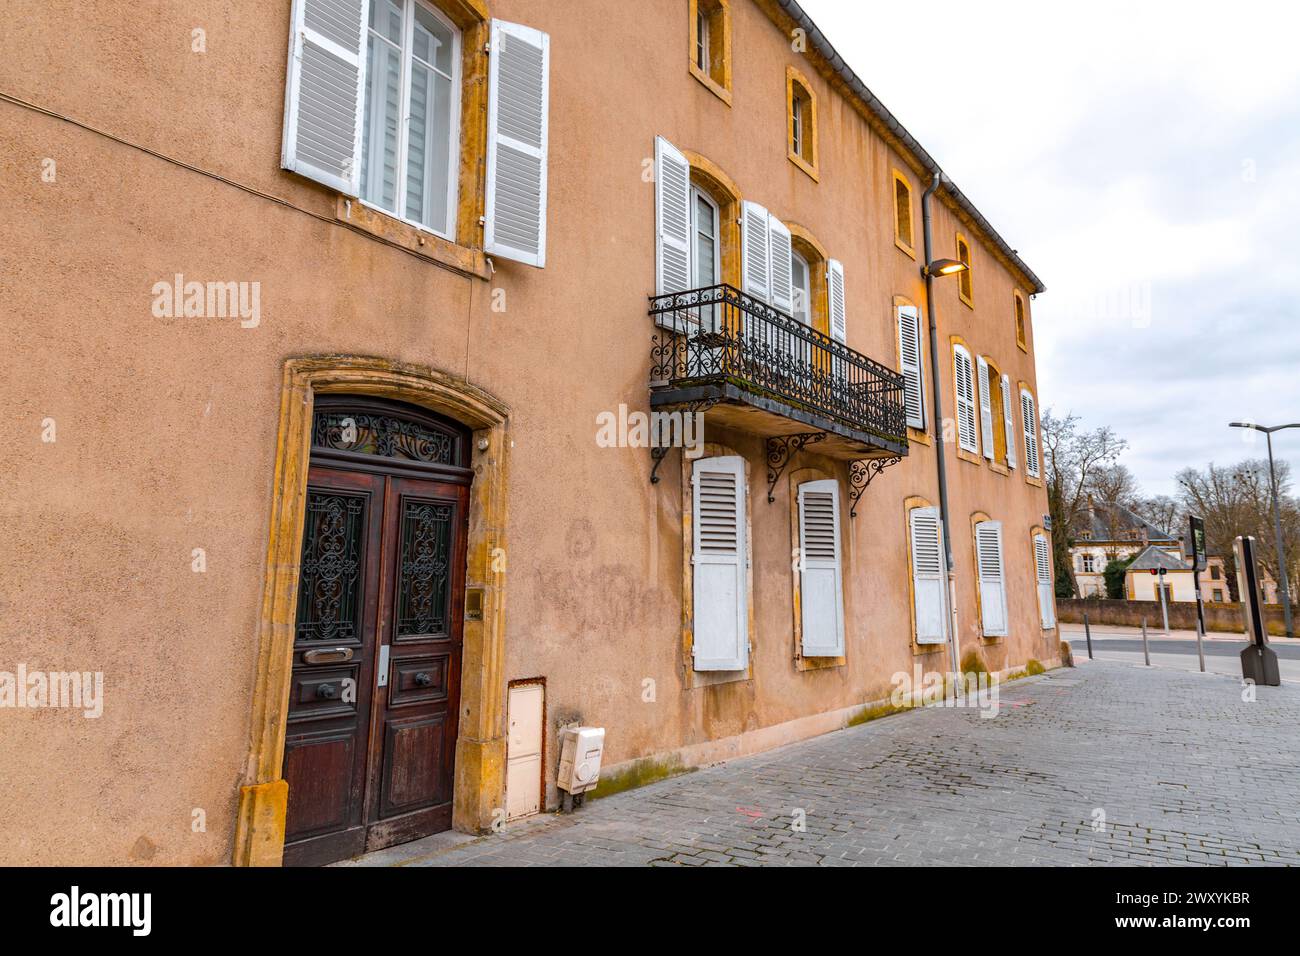 Street view and typical french buildings in the city of Metz, France. Stock Photo